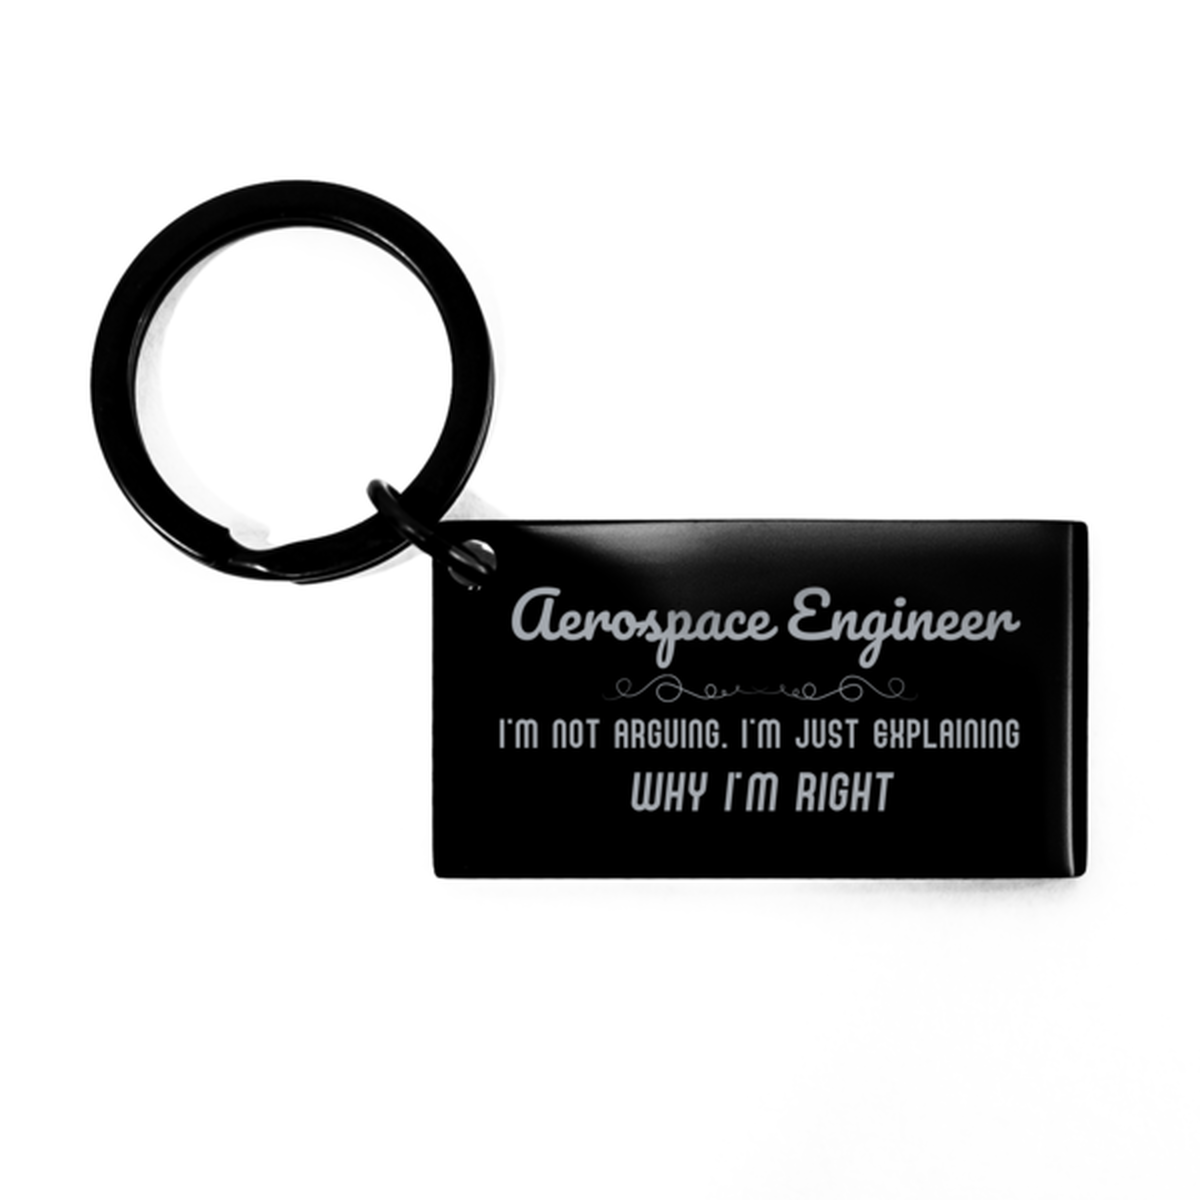 Aerospace Engineer I'm not Arguing. I'm Just Explaining Why I'm RIGHT Keychain, Funny Saying Quote Aerospace Engineer Gifts For Aerospace Engineer Graduation Birthday Christmas Gifts for Men Women Coworker